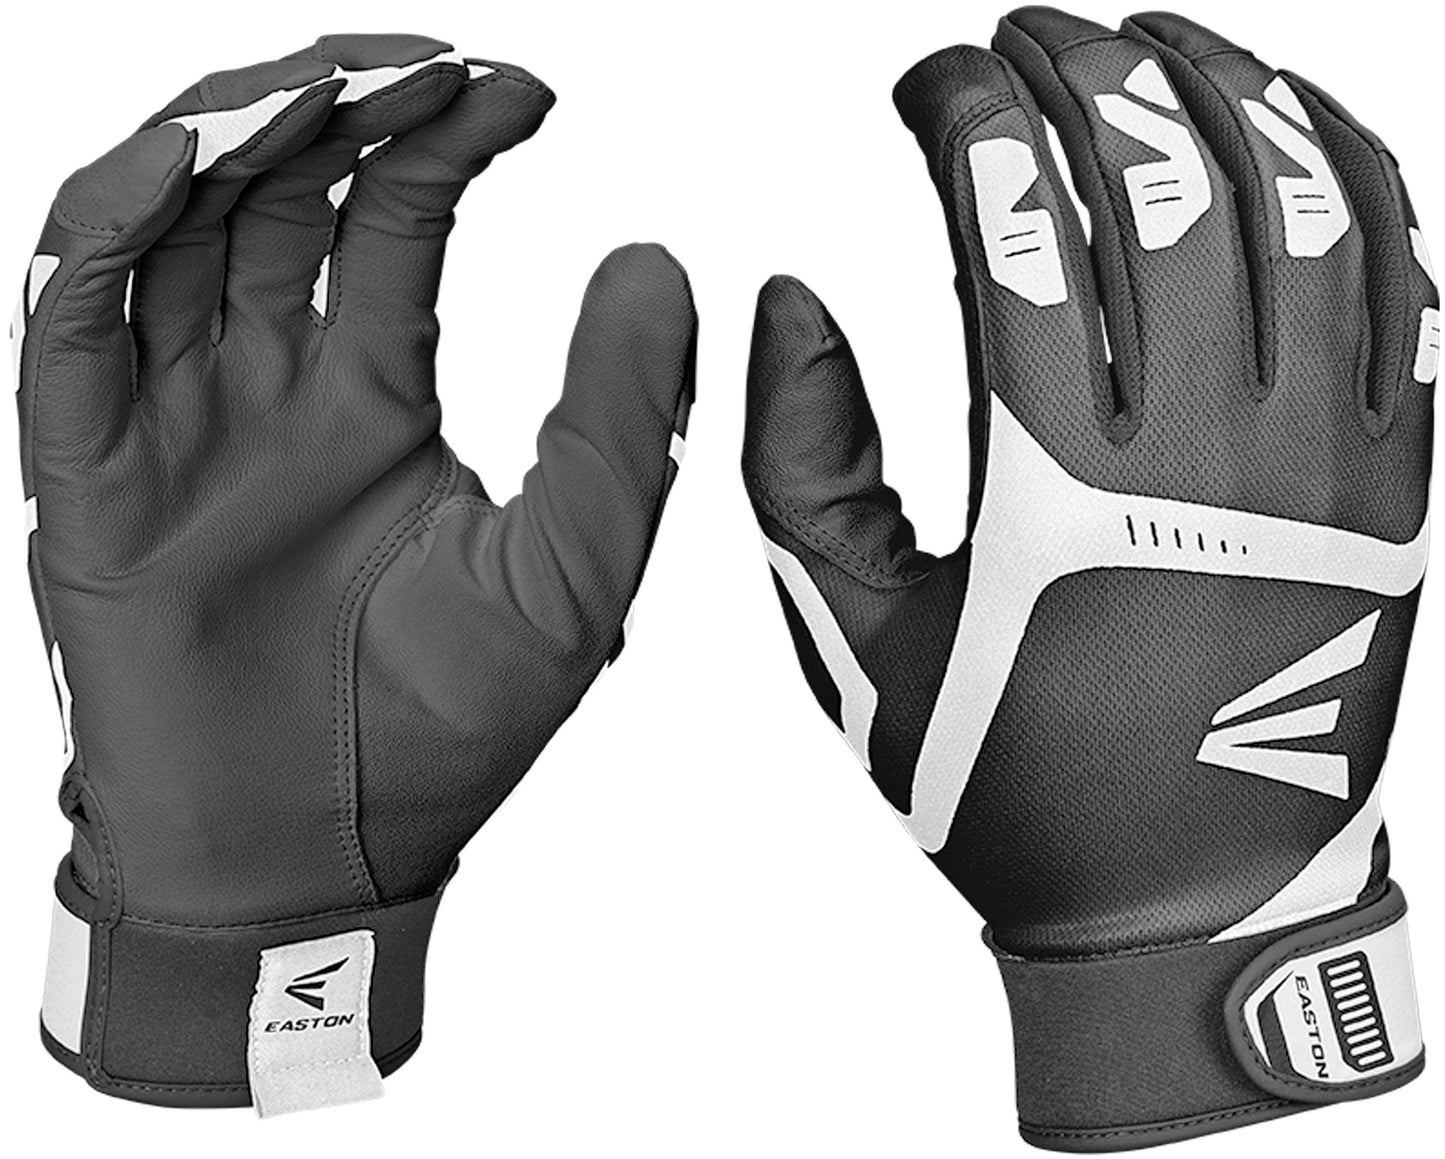 Easton Gametime Youth Batting Gloves PR Youth Small Black New